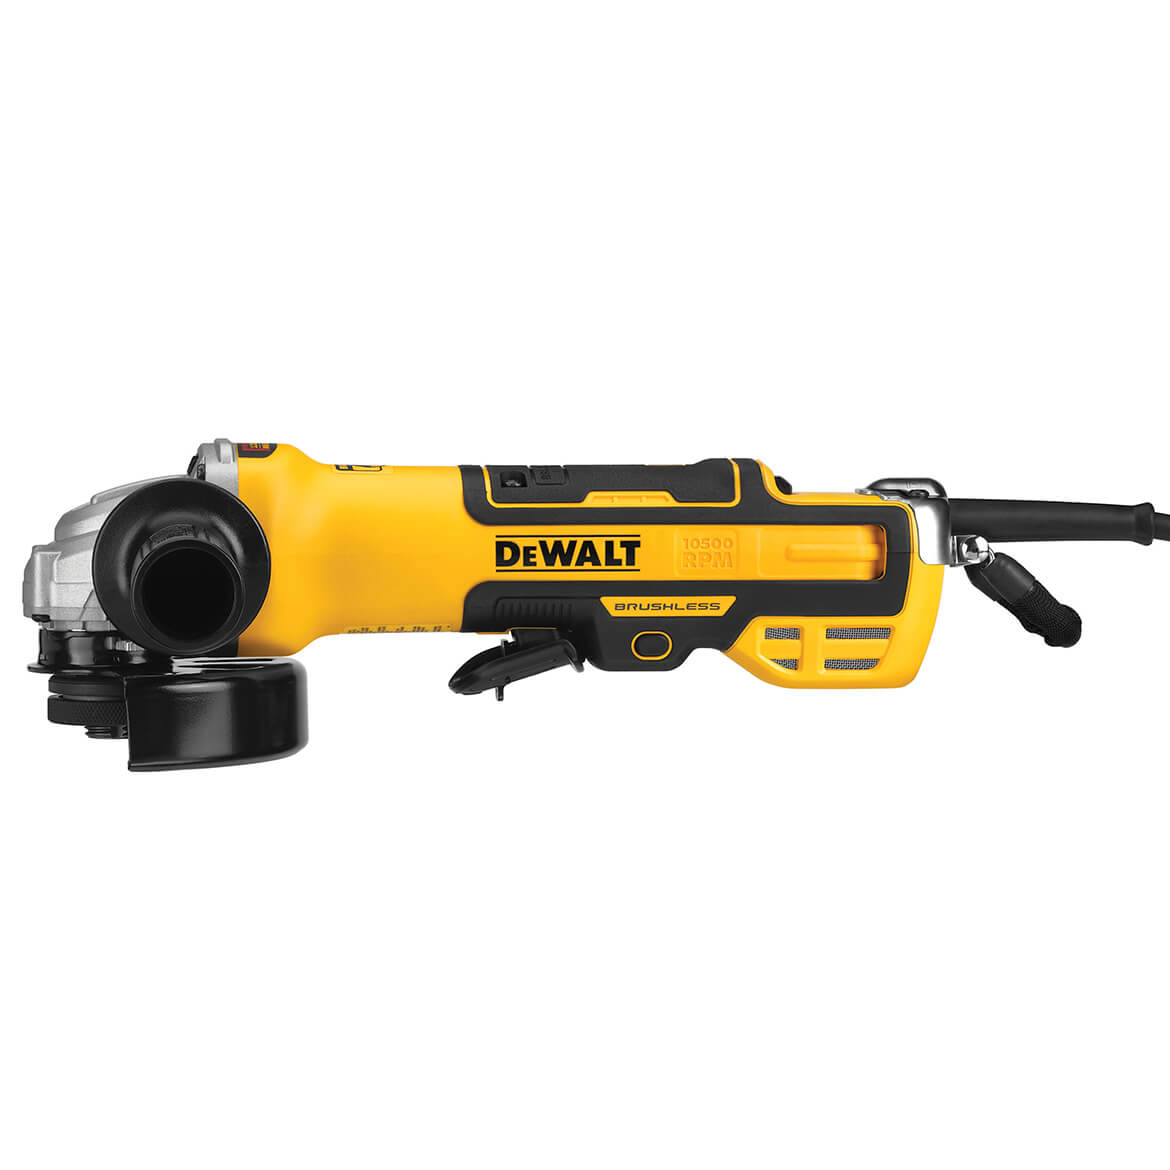 5 IN. BRUSHLESS PADDLE SWITCH SMALL ANGLE GRINDER WITH KICKBACK BRAKE, NO-LOCK, VARIABLE SPEED